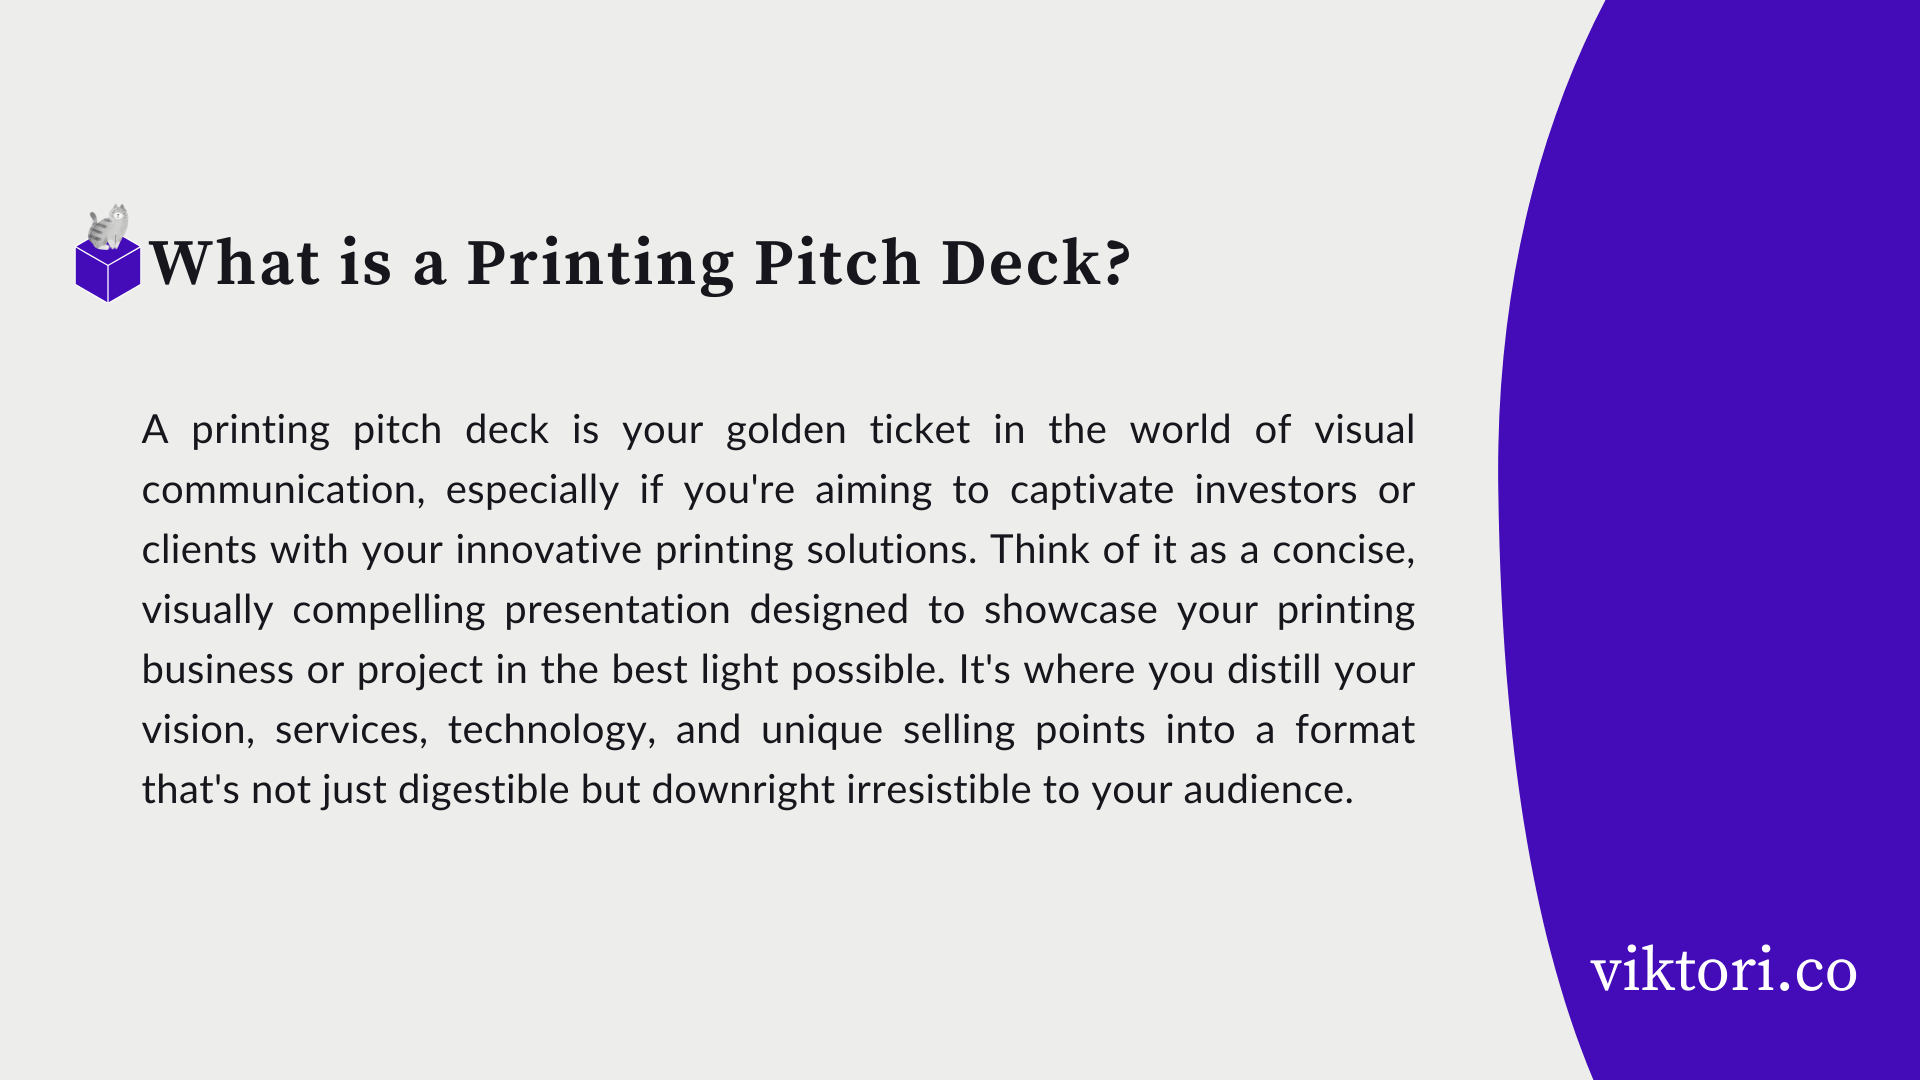 Printing Pitch Deck Definition